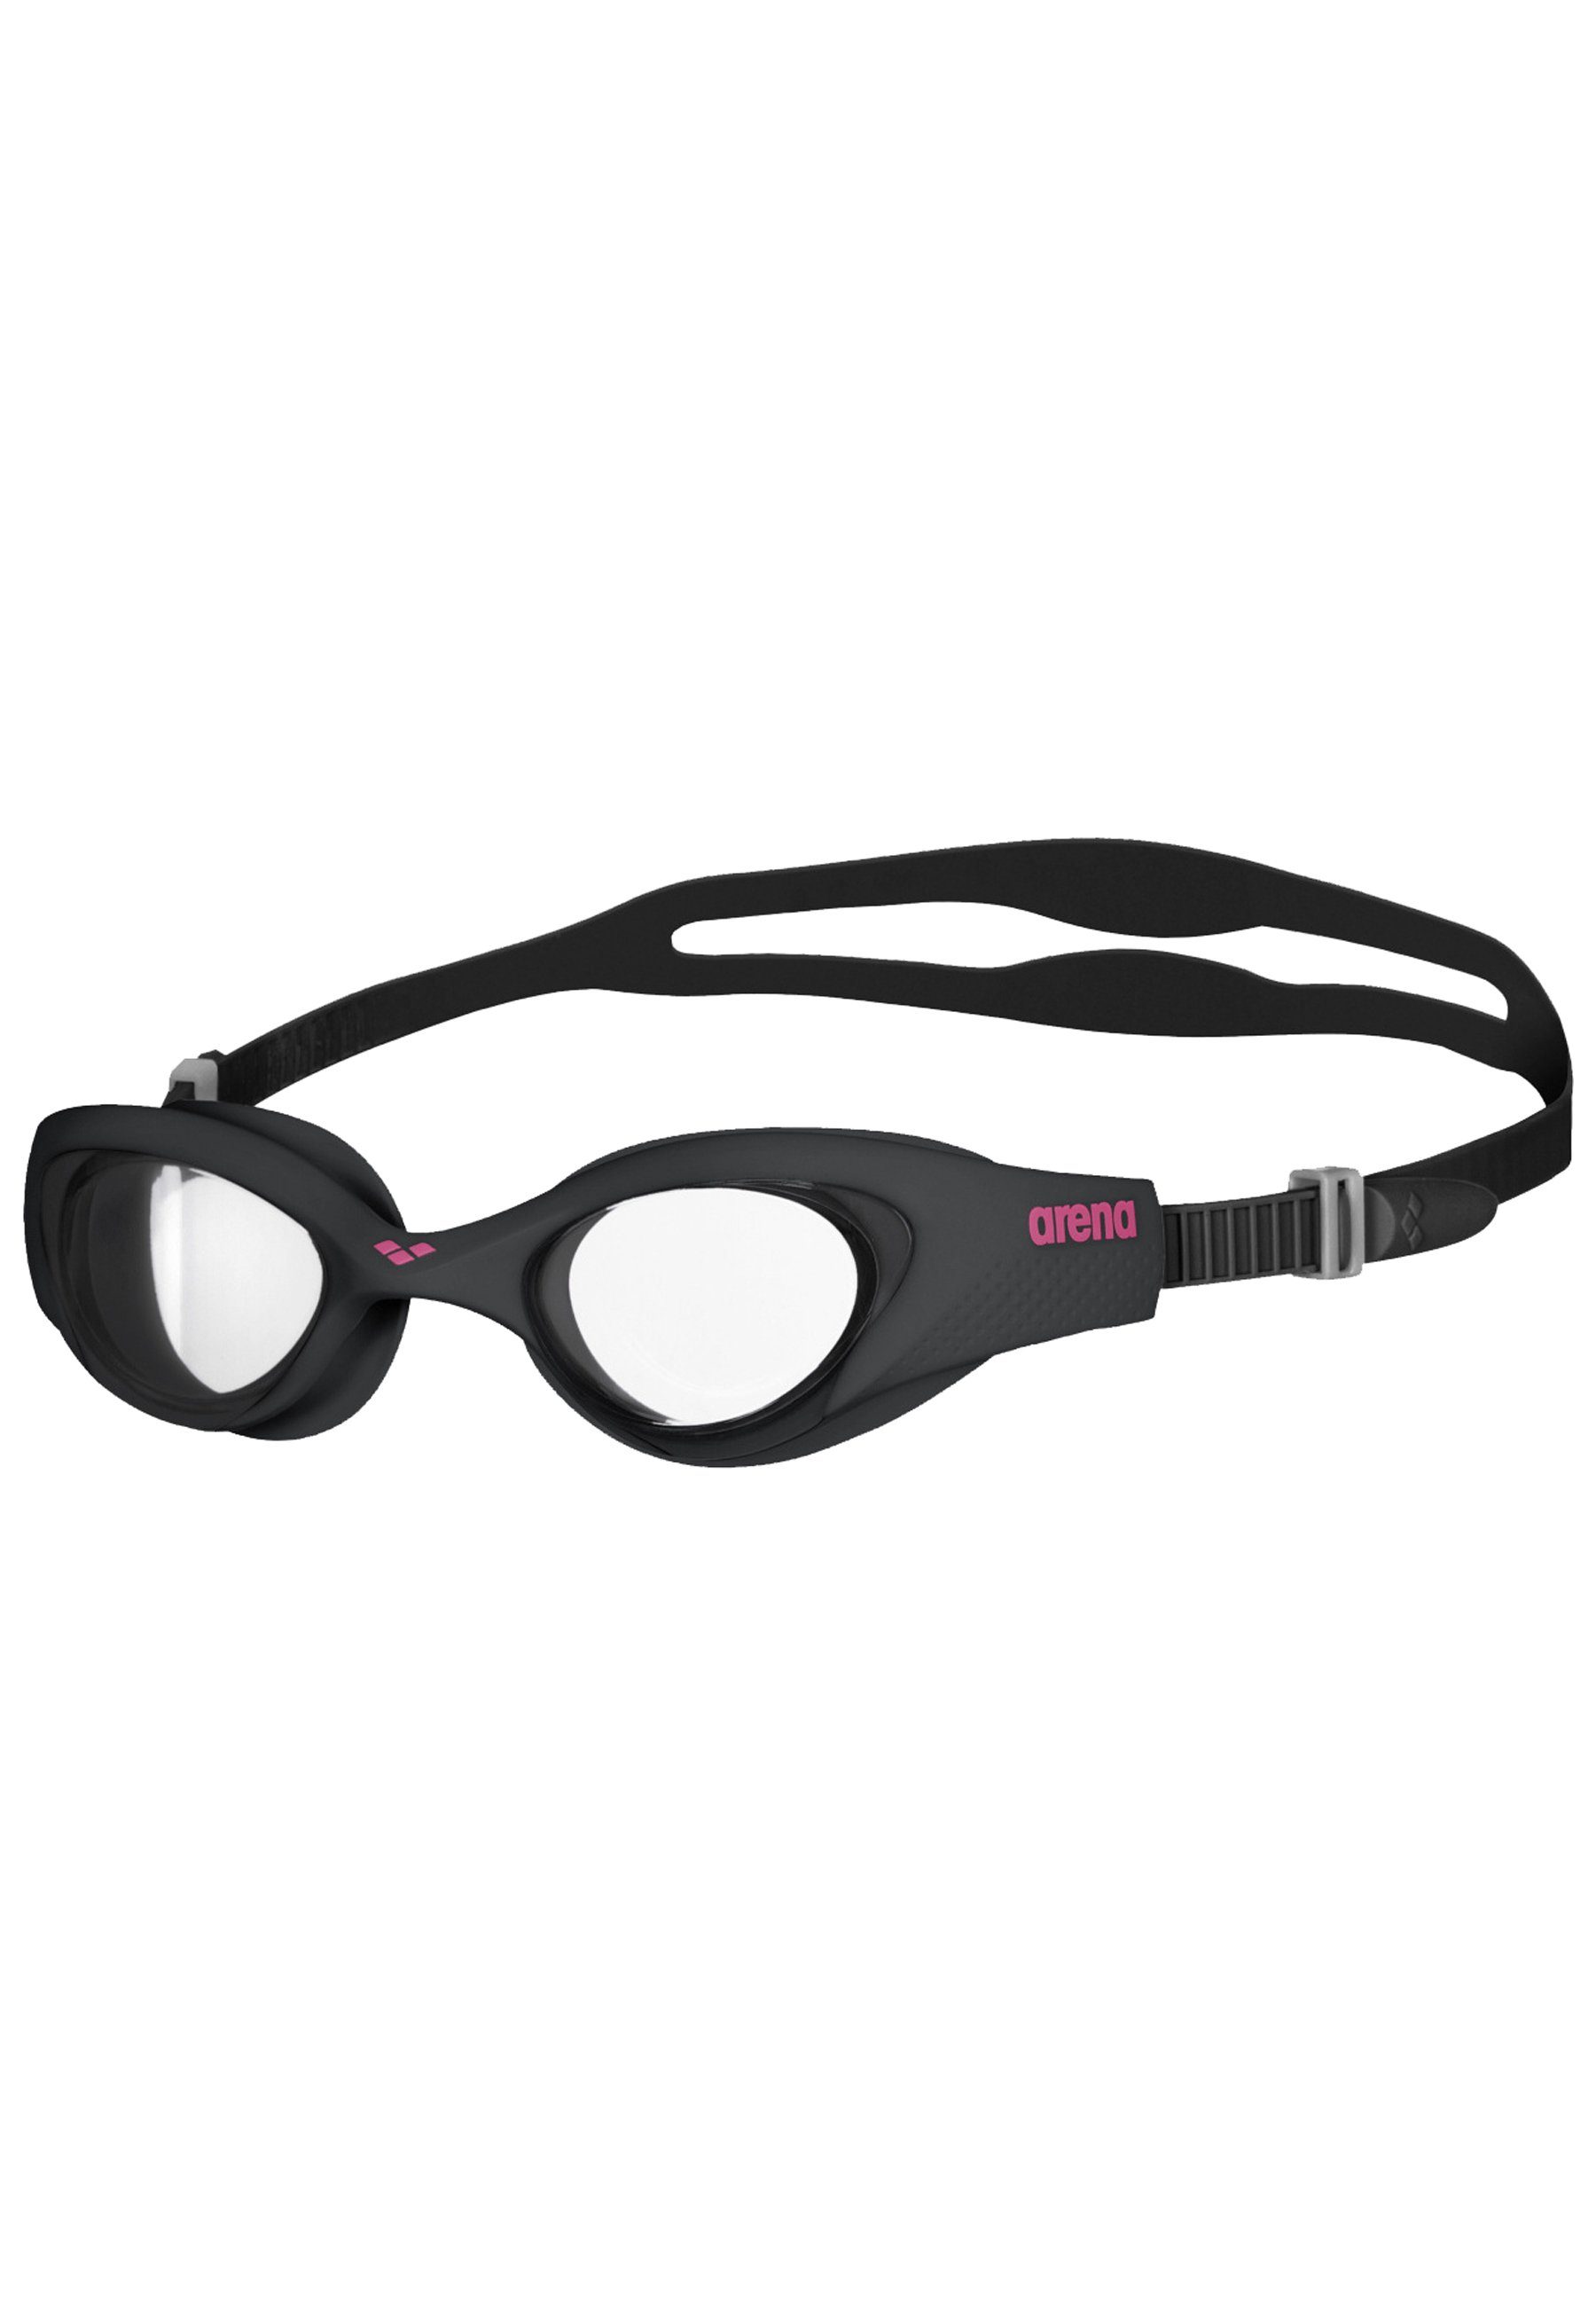 Arena Sonnenbrille The One clear-black-black (1-St)